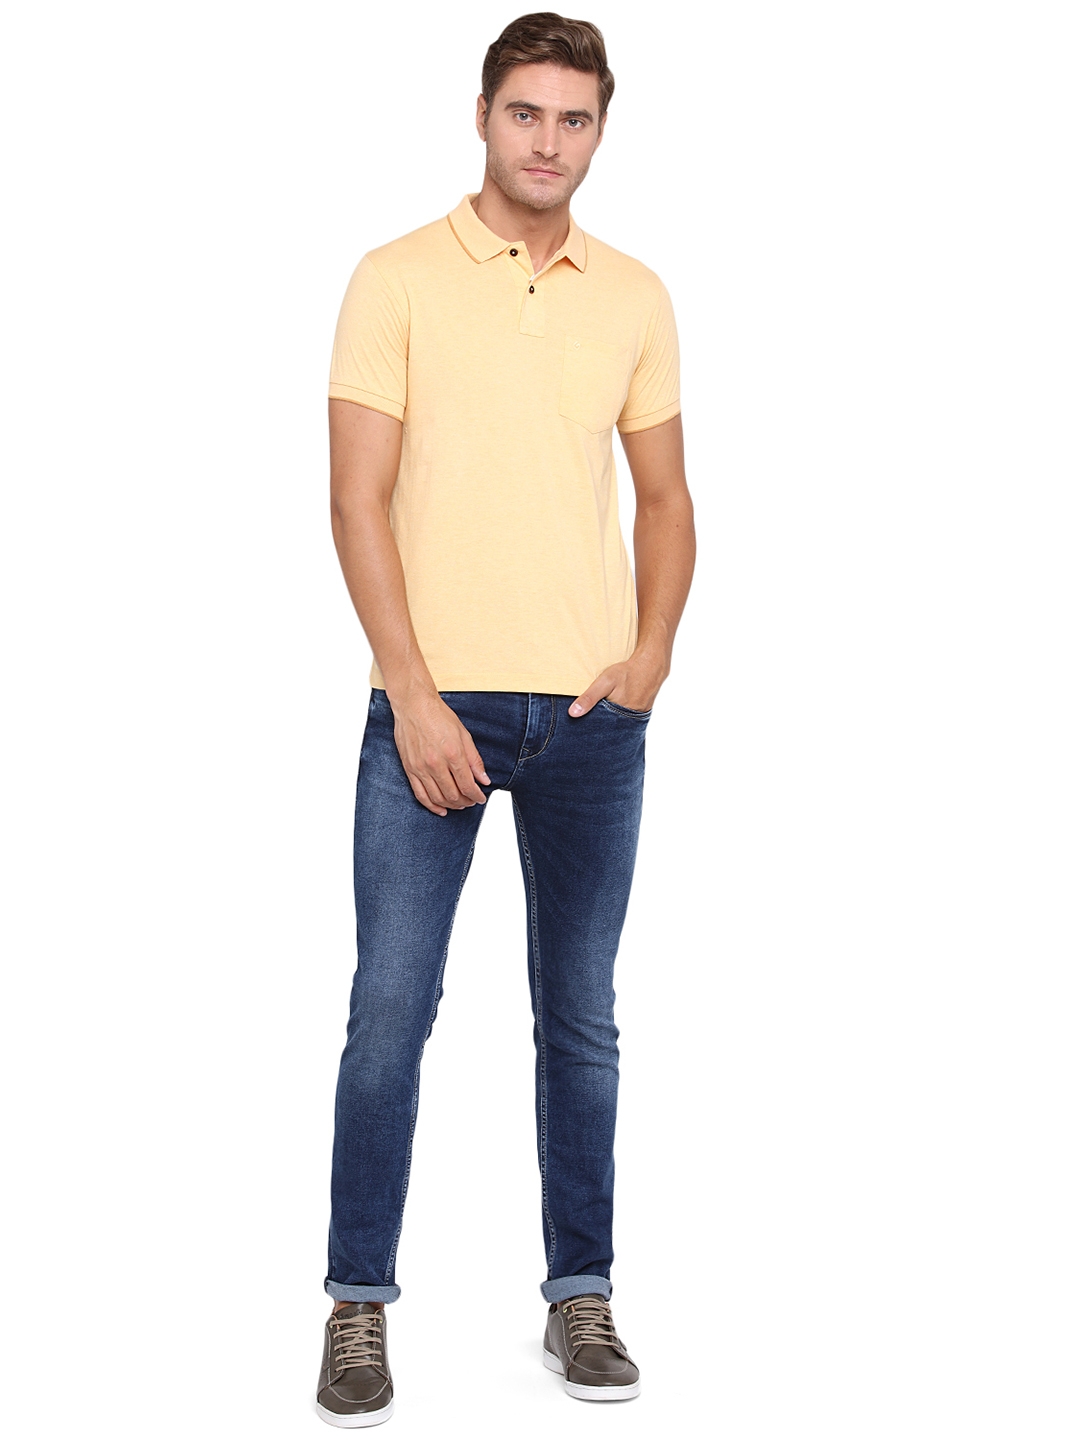 Greenfibre | Light Yellow Solid Slim Fit Polo T-Shirt | Greenfibre 2